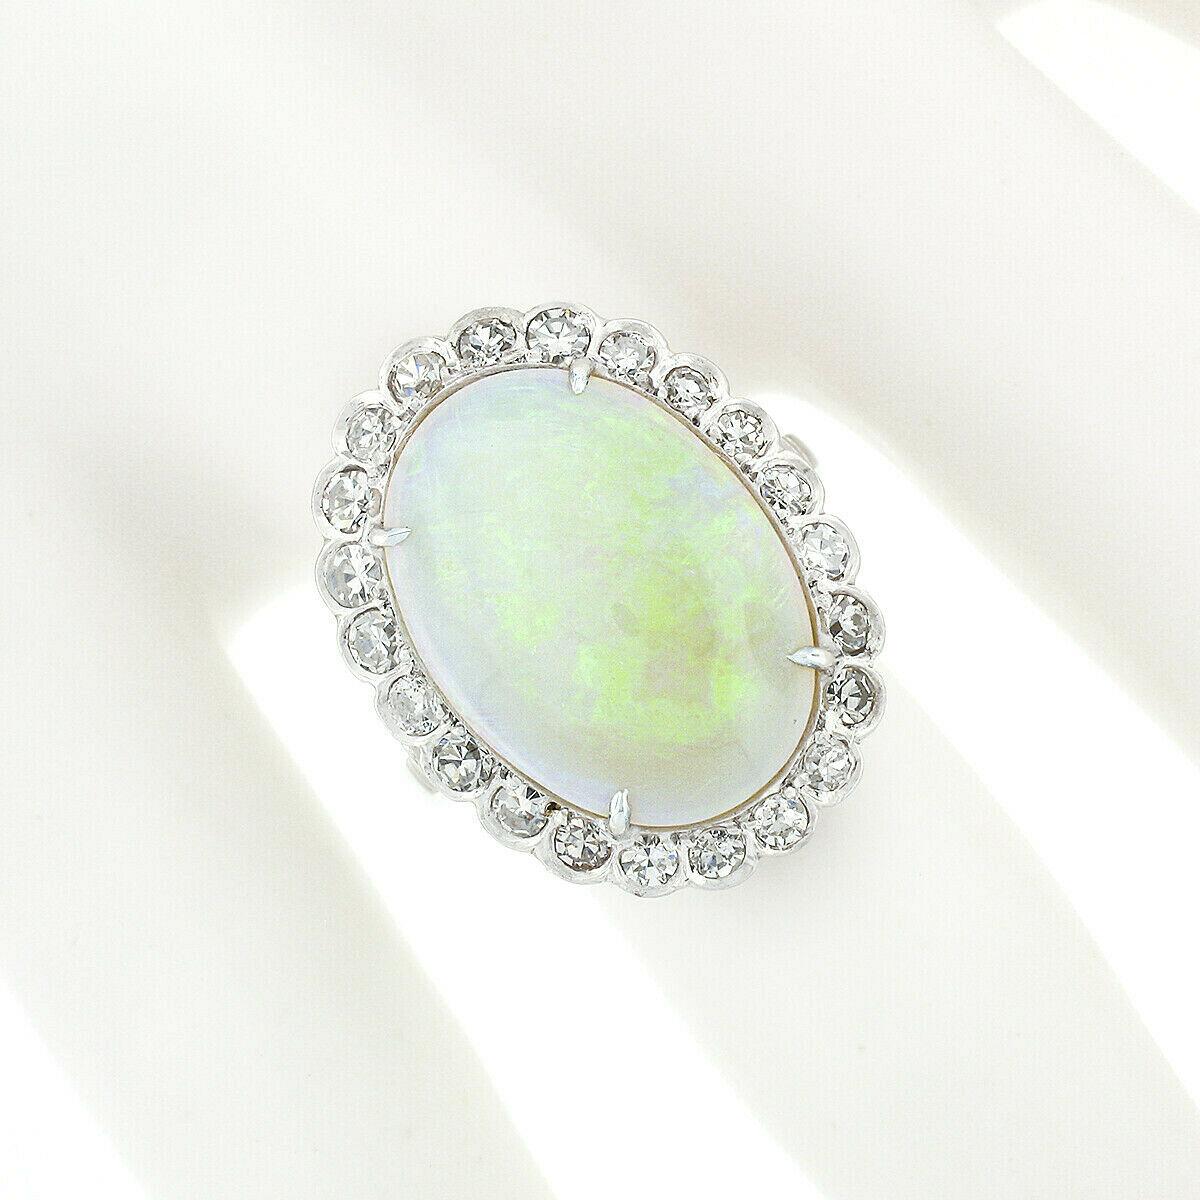 This magnificent fancy vintage ring was crafted in France from solid 950 platinum and features a breathtaking, GIA certified, natural opal gemstone neatly and elegantly claw-prong set at the center of a delicate halo design. The white opal is in